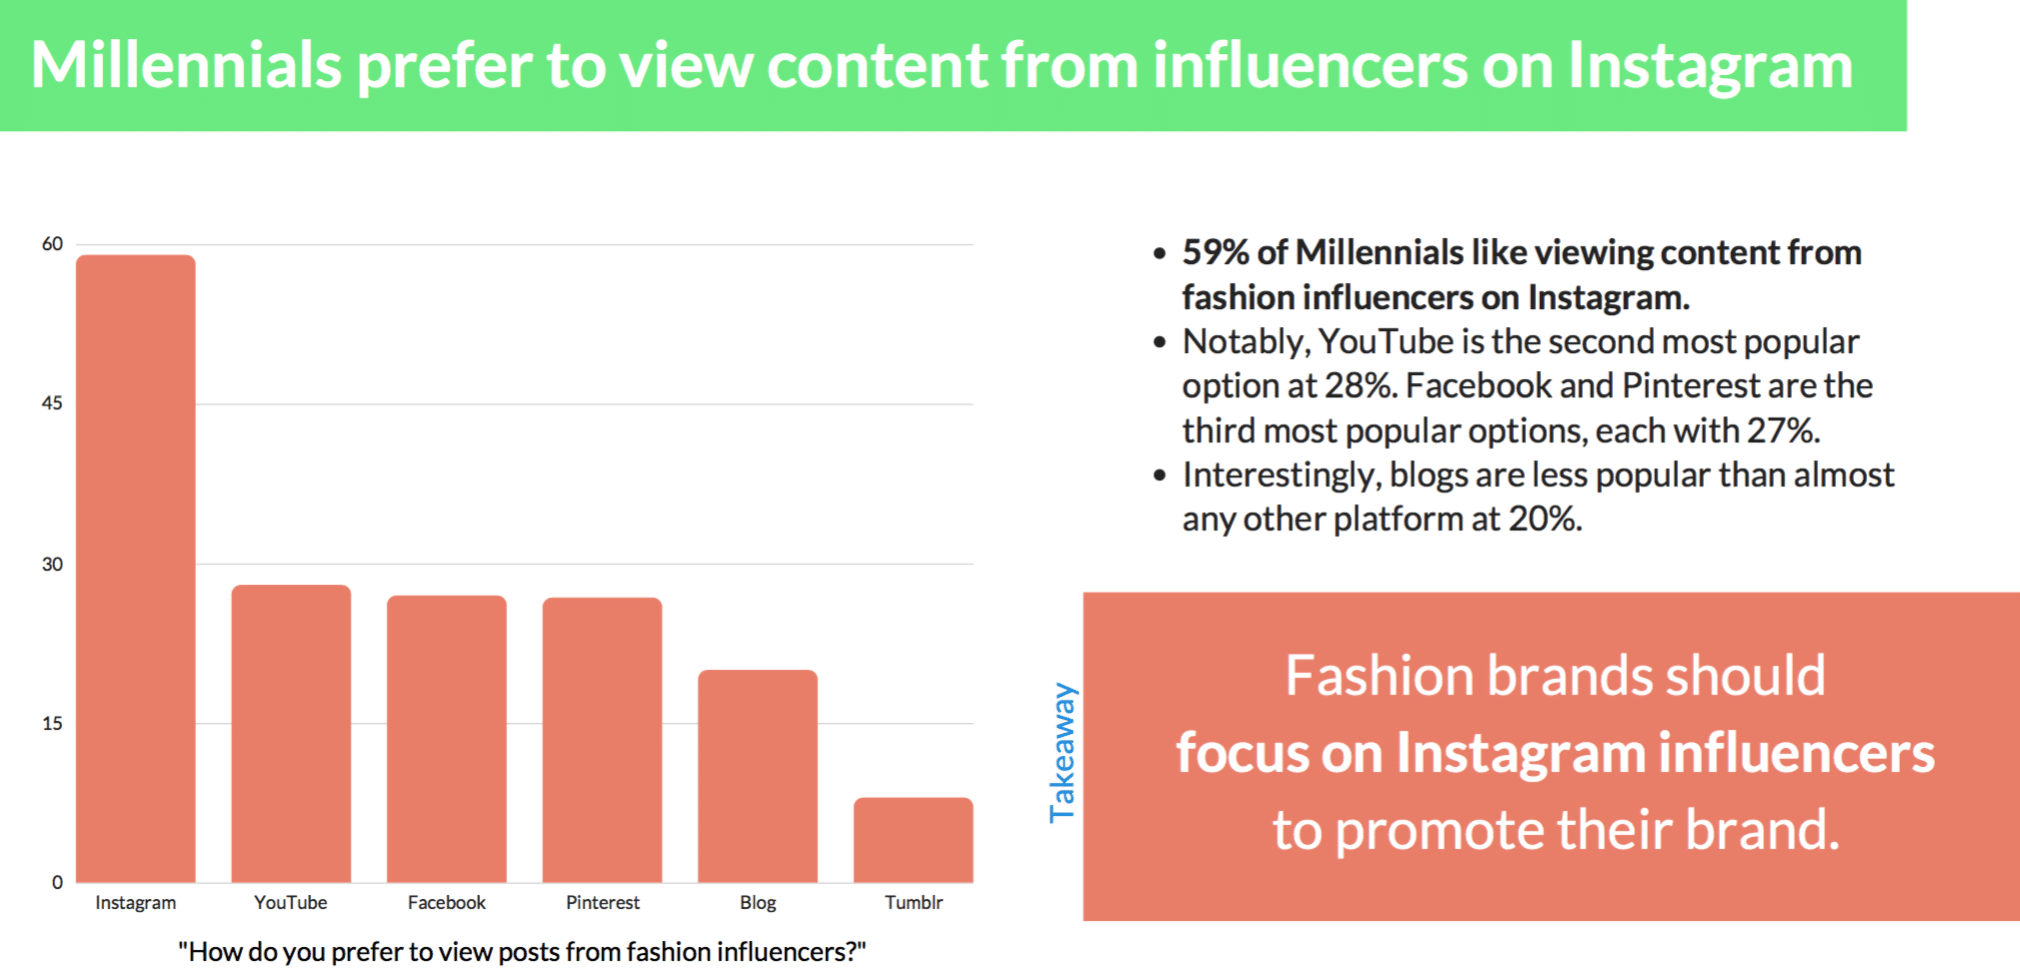 Millennials rely on social influencers more—but trust them less